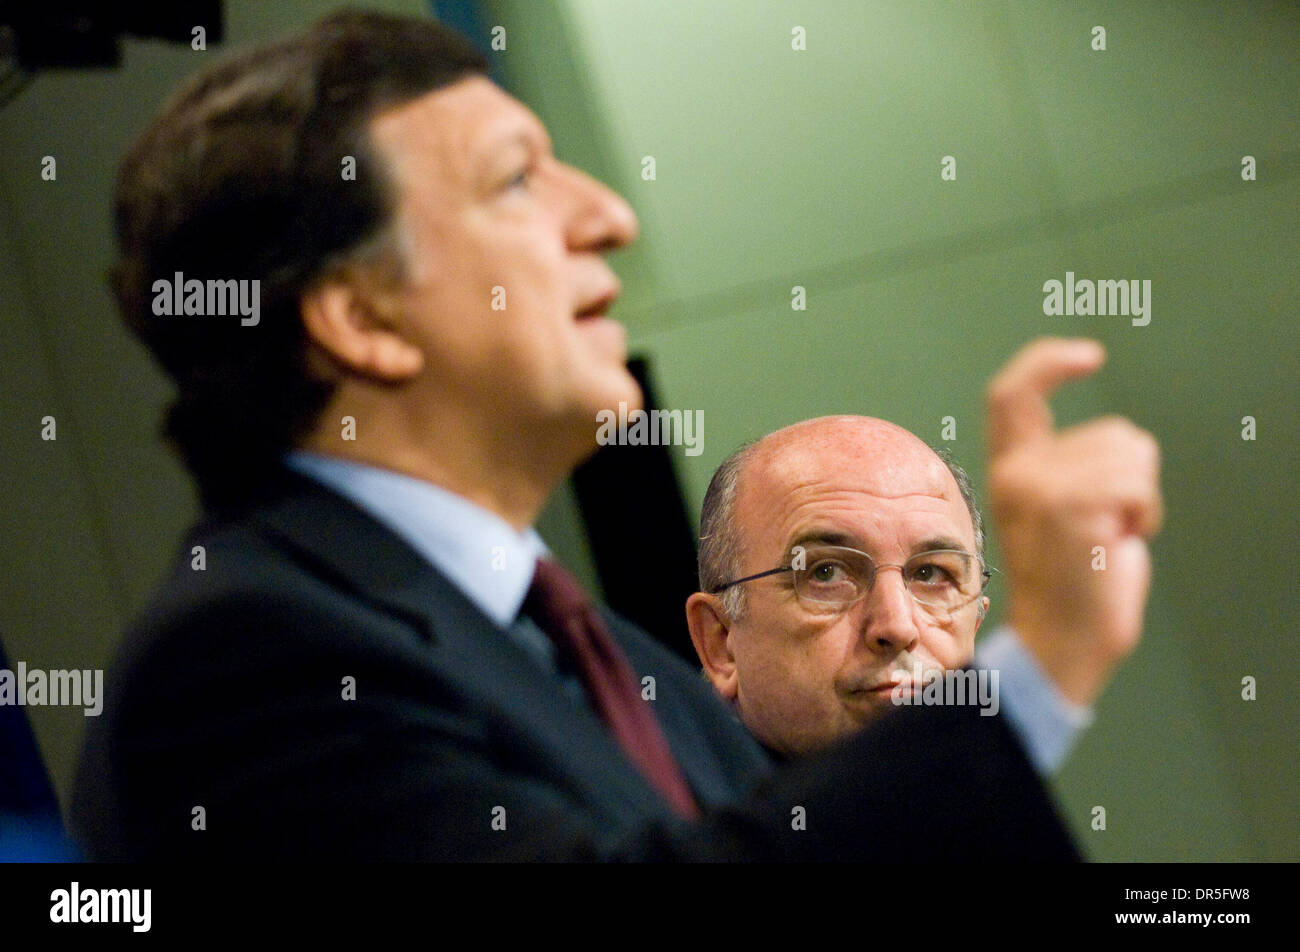 Nov 26, 2008 - Brussels, Belgium - European Commission President JOSE MANUEL BARROSO and European Monetary Affairs Commissioner, JOAQUIN ALMUNIA talk to the press during a joint press conference on a European Recovery Plan for Growth and Jobs at European Commission headquarters in Brussels, Belgium. (Credit Image: © Wiktor Dabkowski/ZUMA Press) Stock Photo